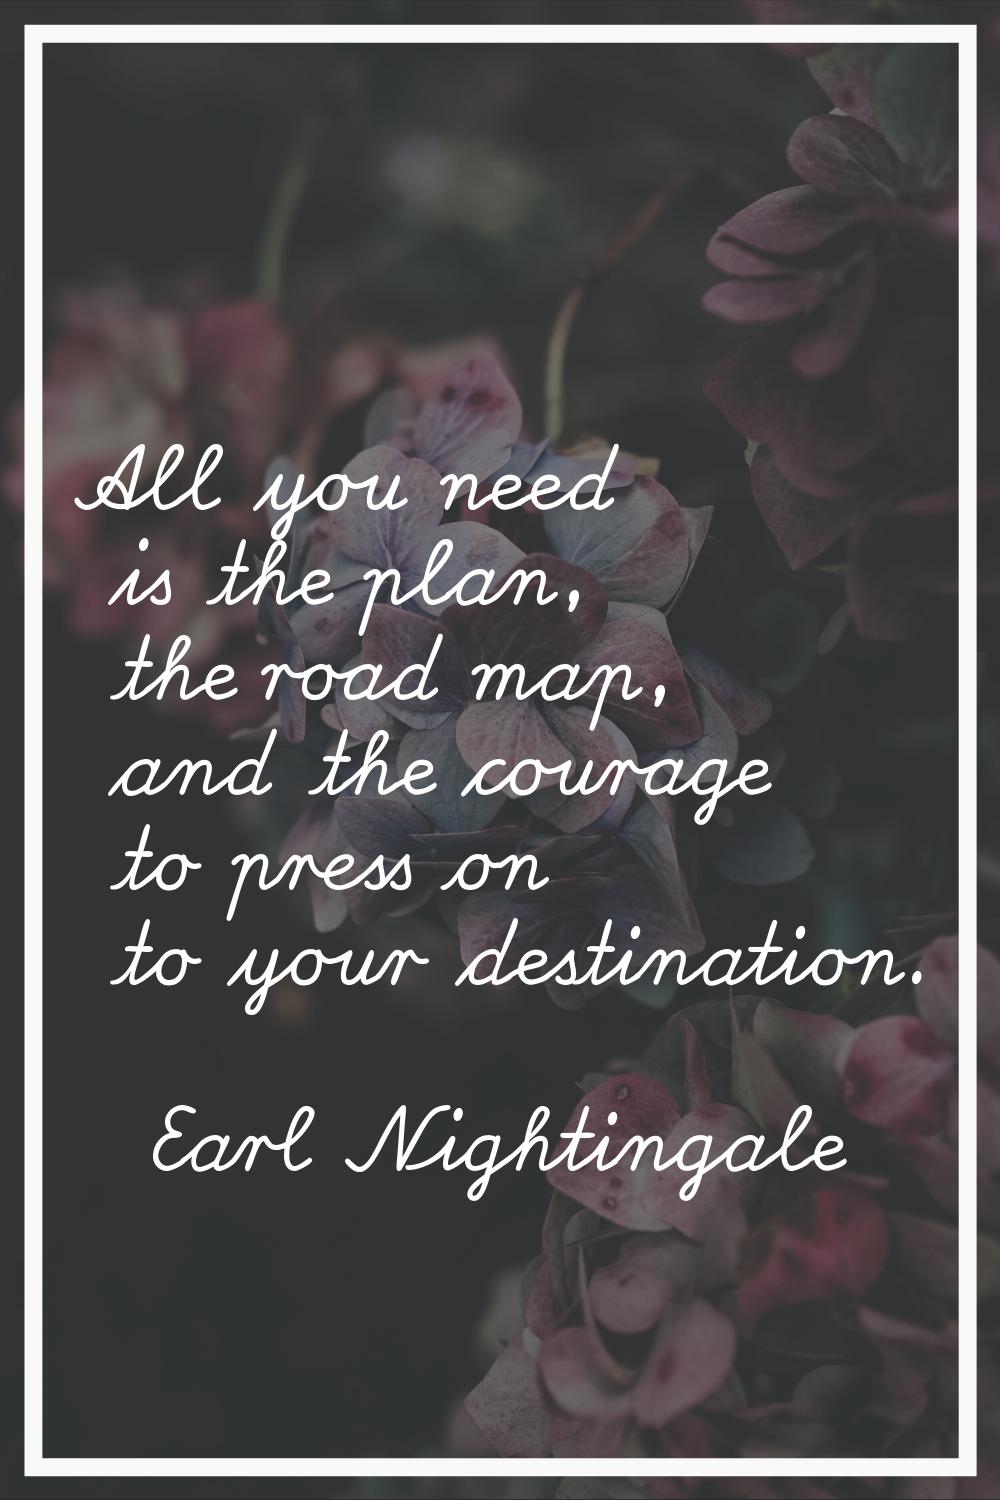 All you need is the plan, the road map, and the courage to press on to your destination.